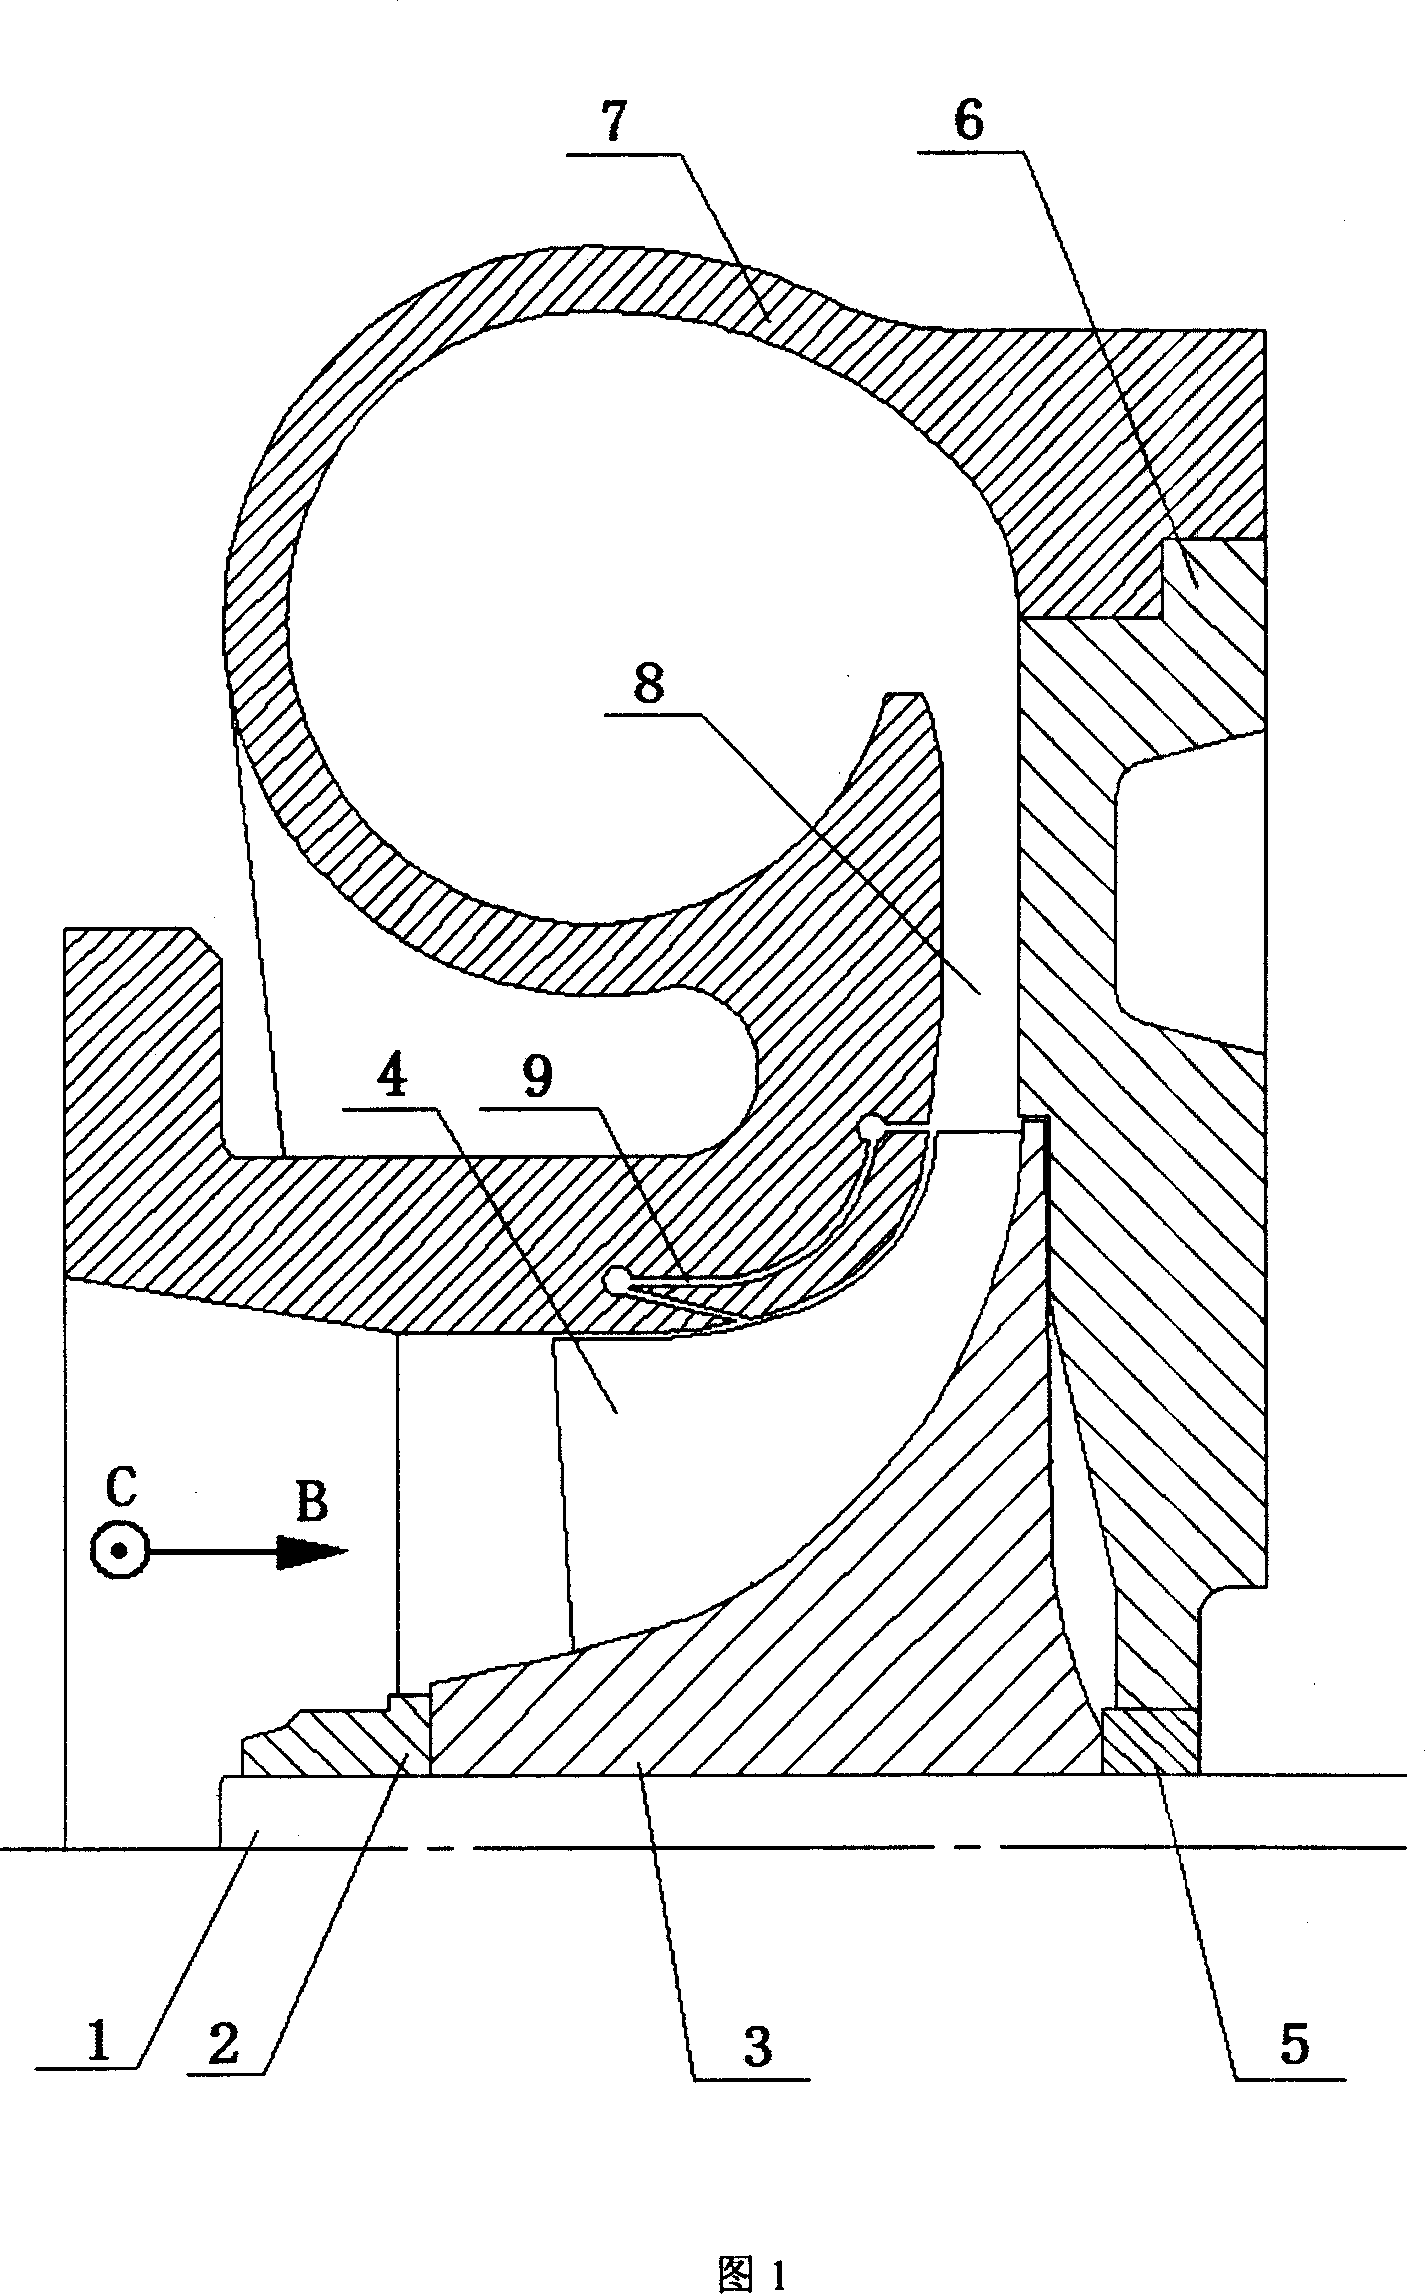 Centrifugal compressor having air removal jet box structure